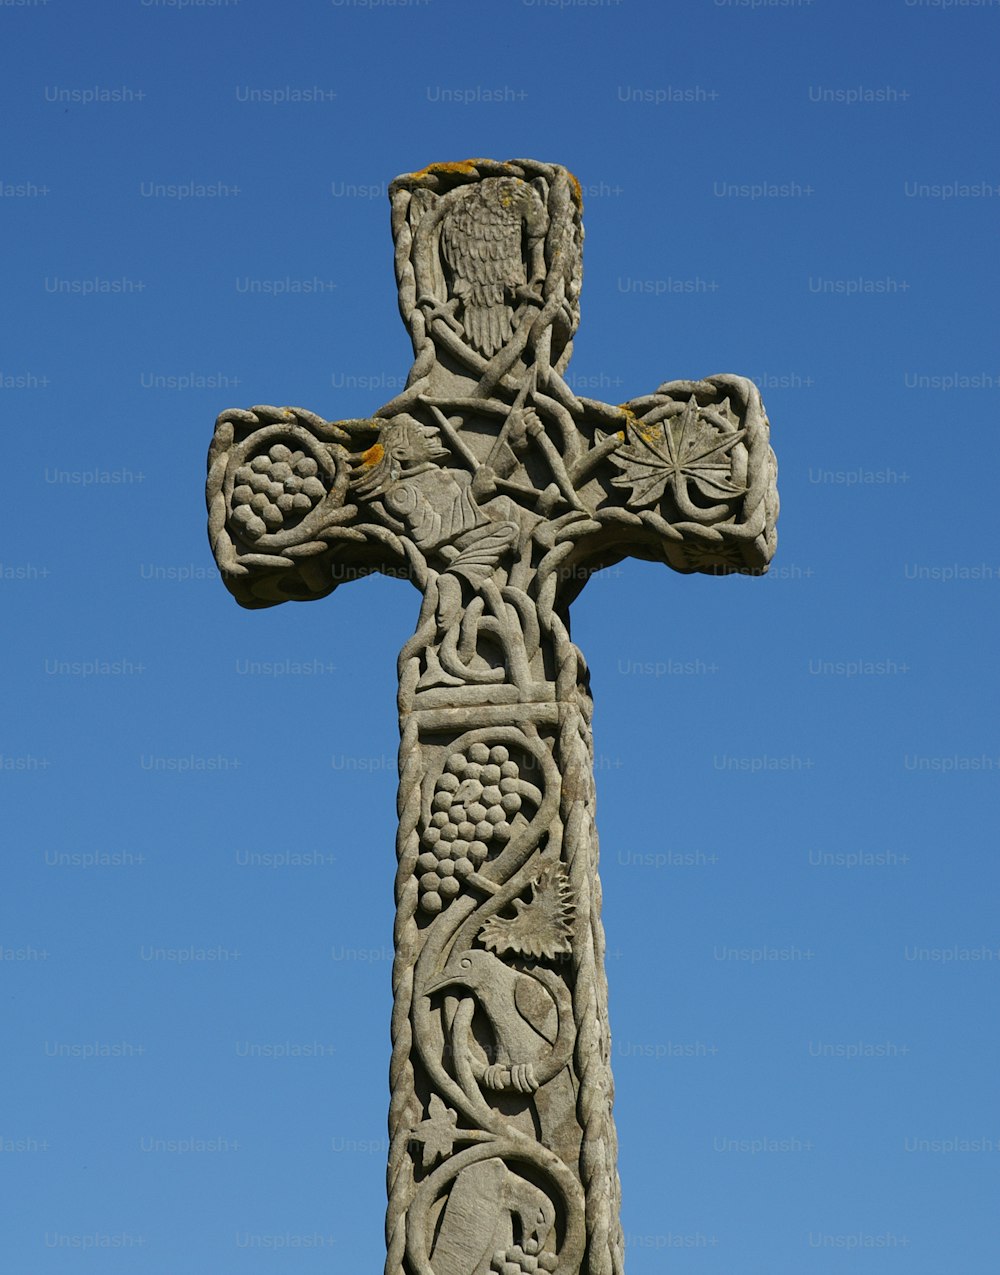 a stone cross with carvings on it against a blue sky